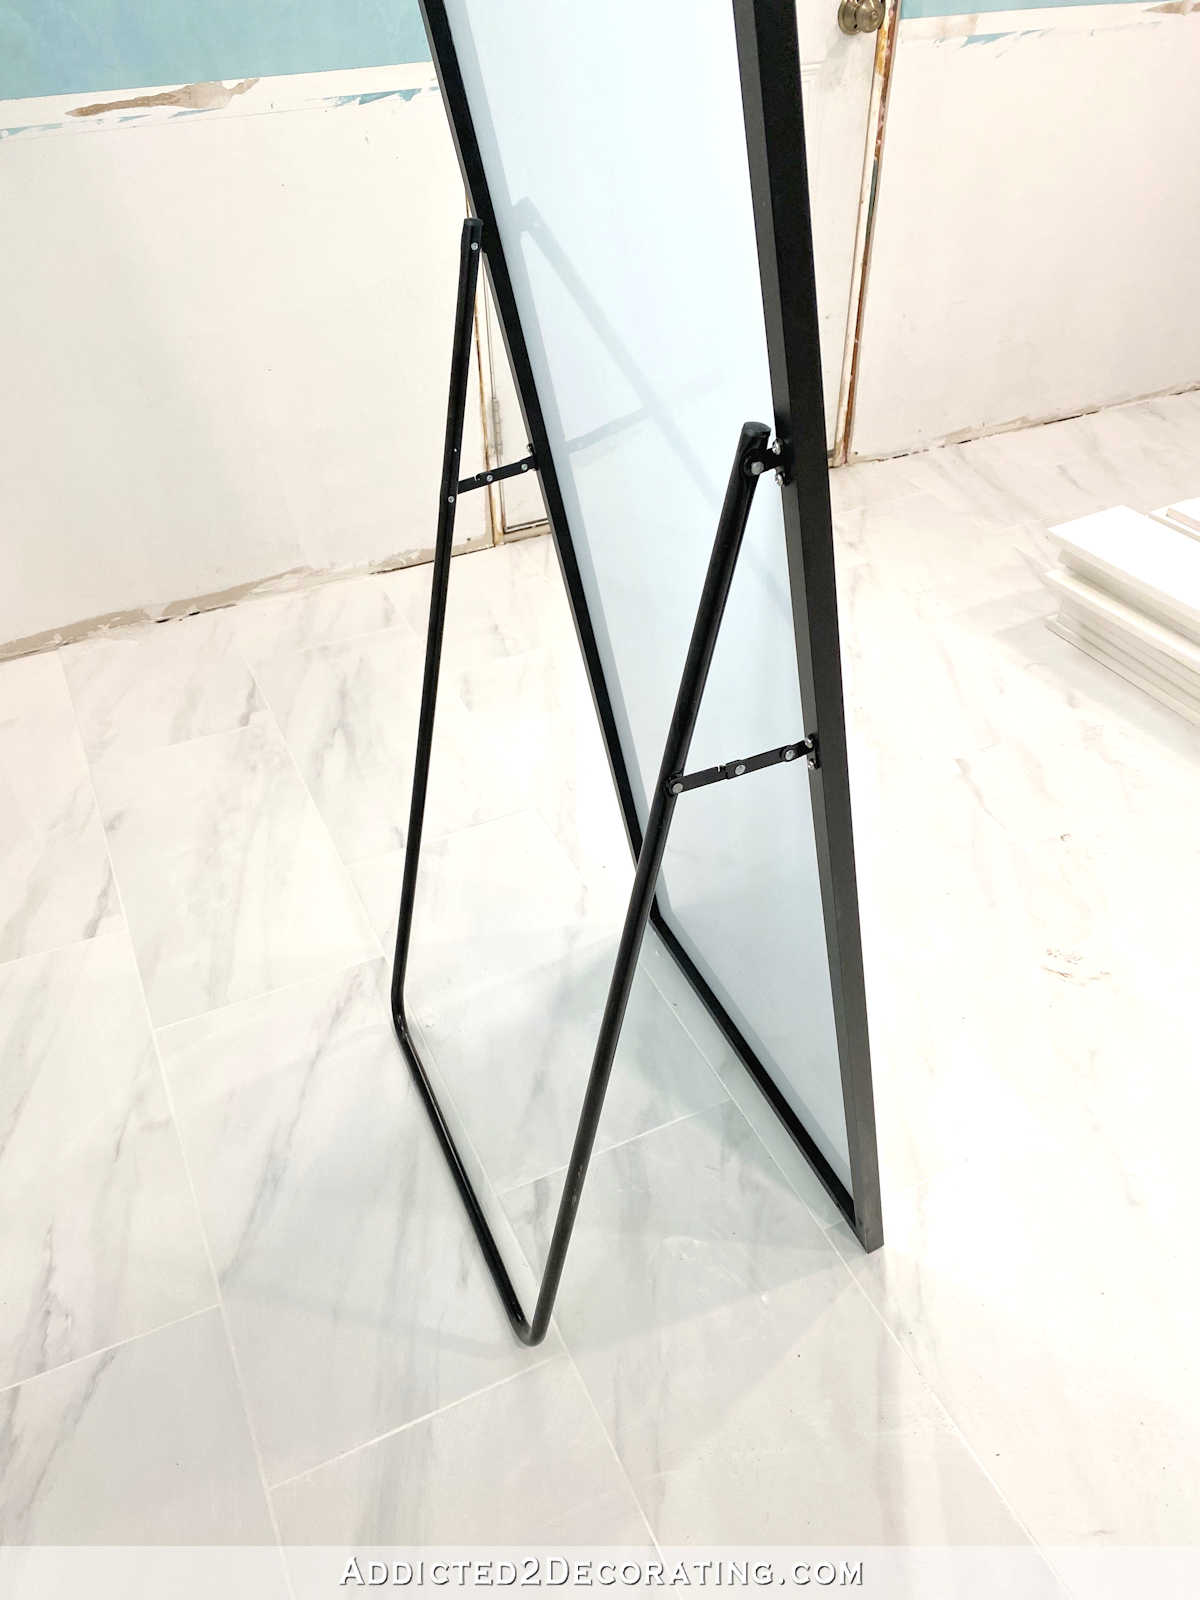 black framed floor mirror -- stand can be removed with a screwdriver so the mirror can be hung on the wal